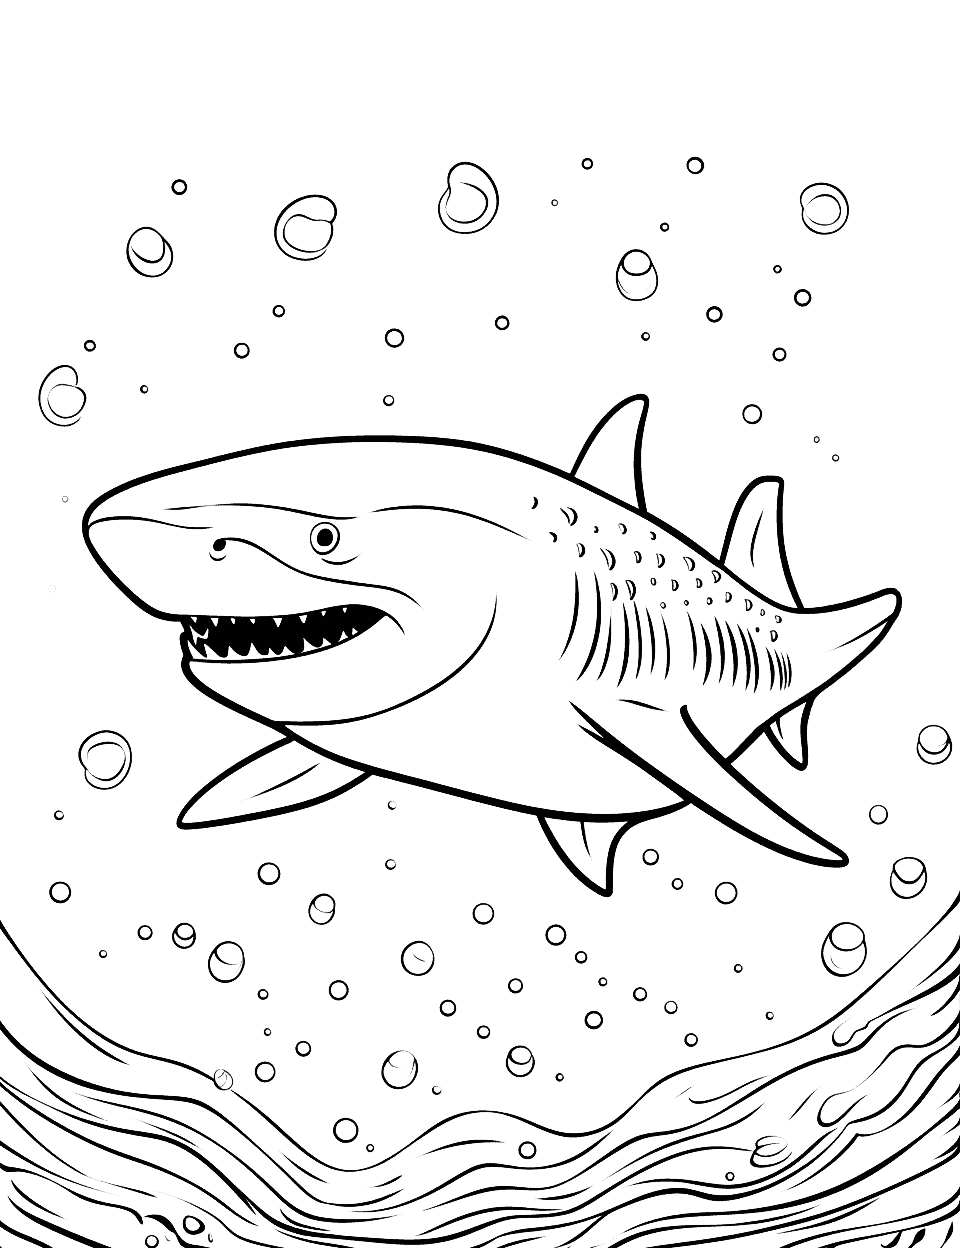 Whale Shark's Gentle Swim Shark Coloring Page - A peaceful scene of a whale shark swimming calmly in the deep blue sea.